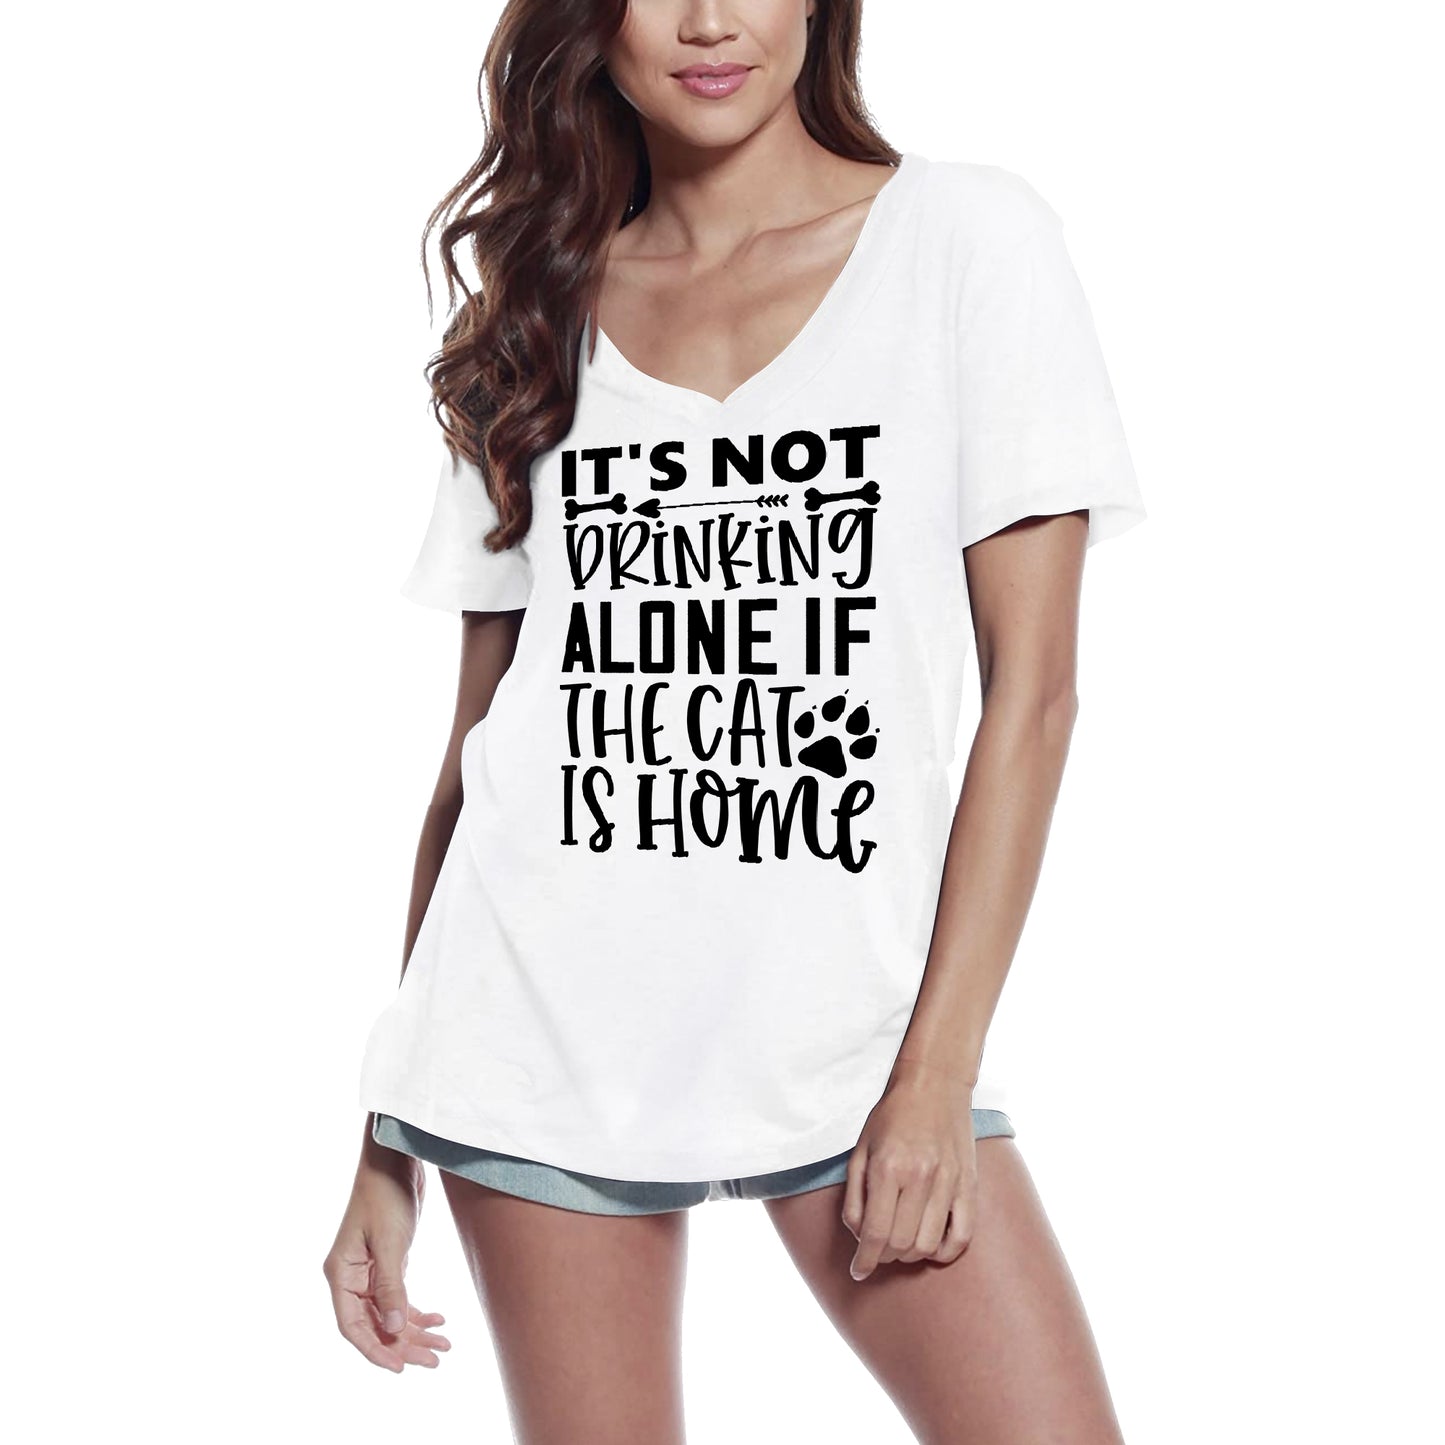 ULTRABASIC Women's T-Shirt It's Not Drinking Alone If the Cat is Home - Short Sleeve Tee Shirt Tops